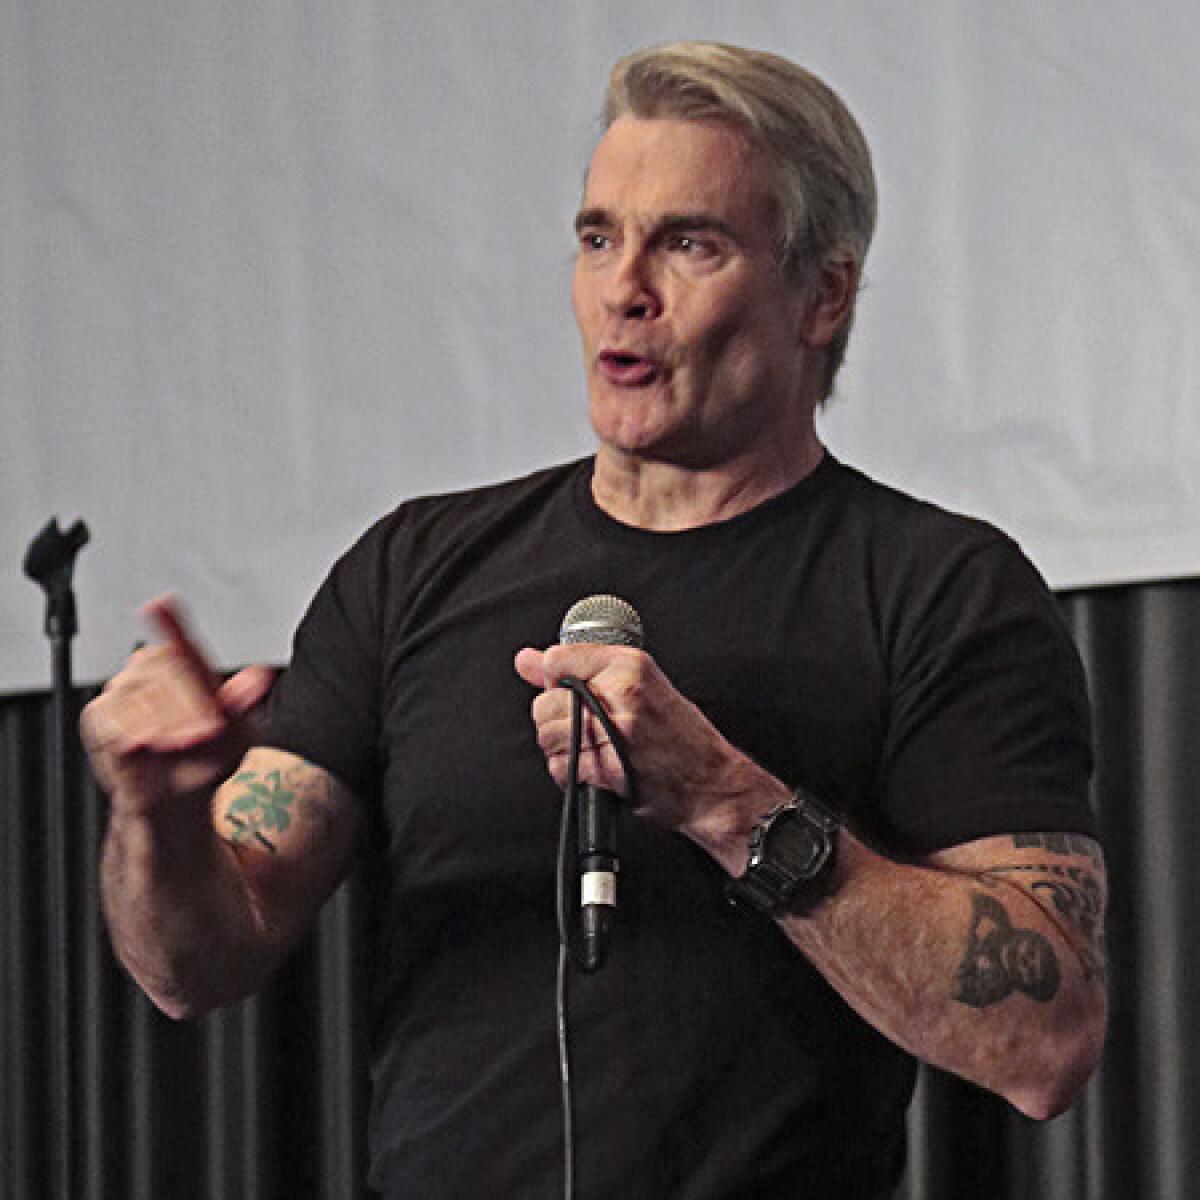 "When you get out into the world you meet people whose humanity eclipses your own," Henry Rollins told L.A. Times Travel Show visitors on Sunday. "And hopefully you can bring it back to your normal 9-to-5 day and come back different than you've been before."